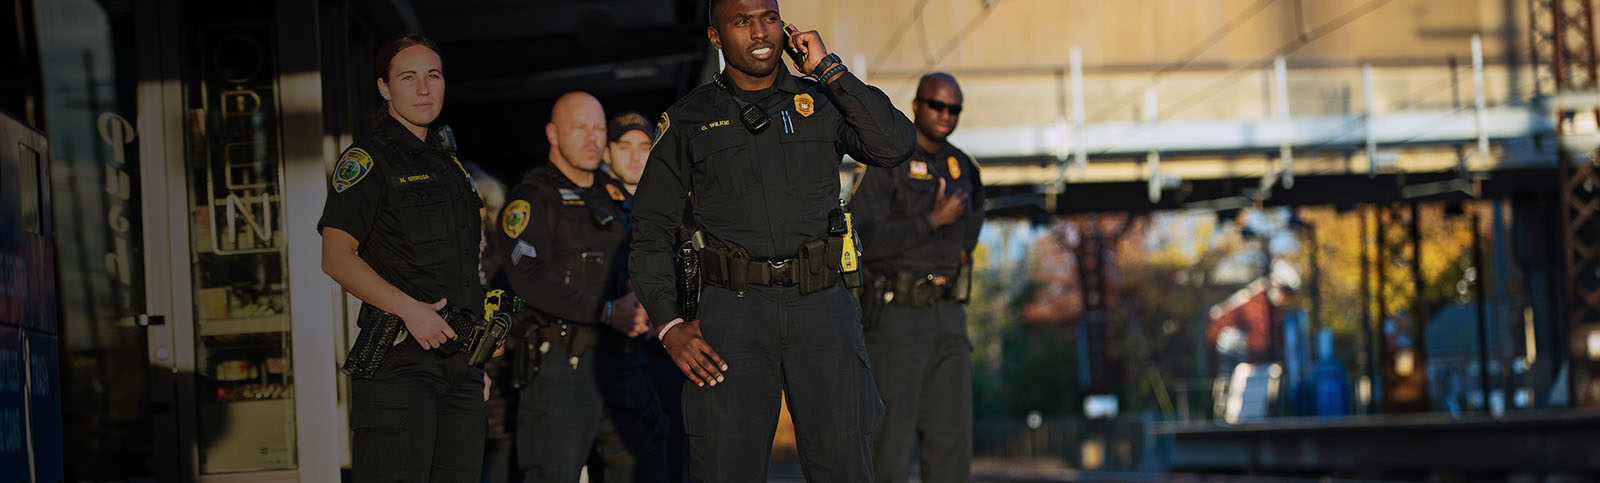 Group of police officers in black uniforms standing next to a train platform as they appear to await for the train, one of whom is talking on the phone 